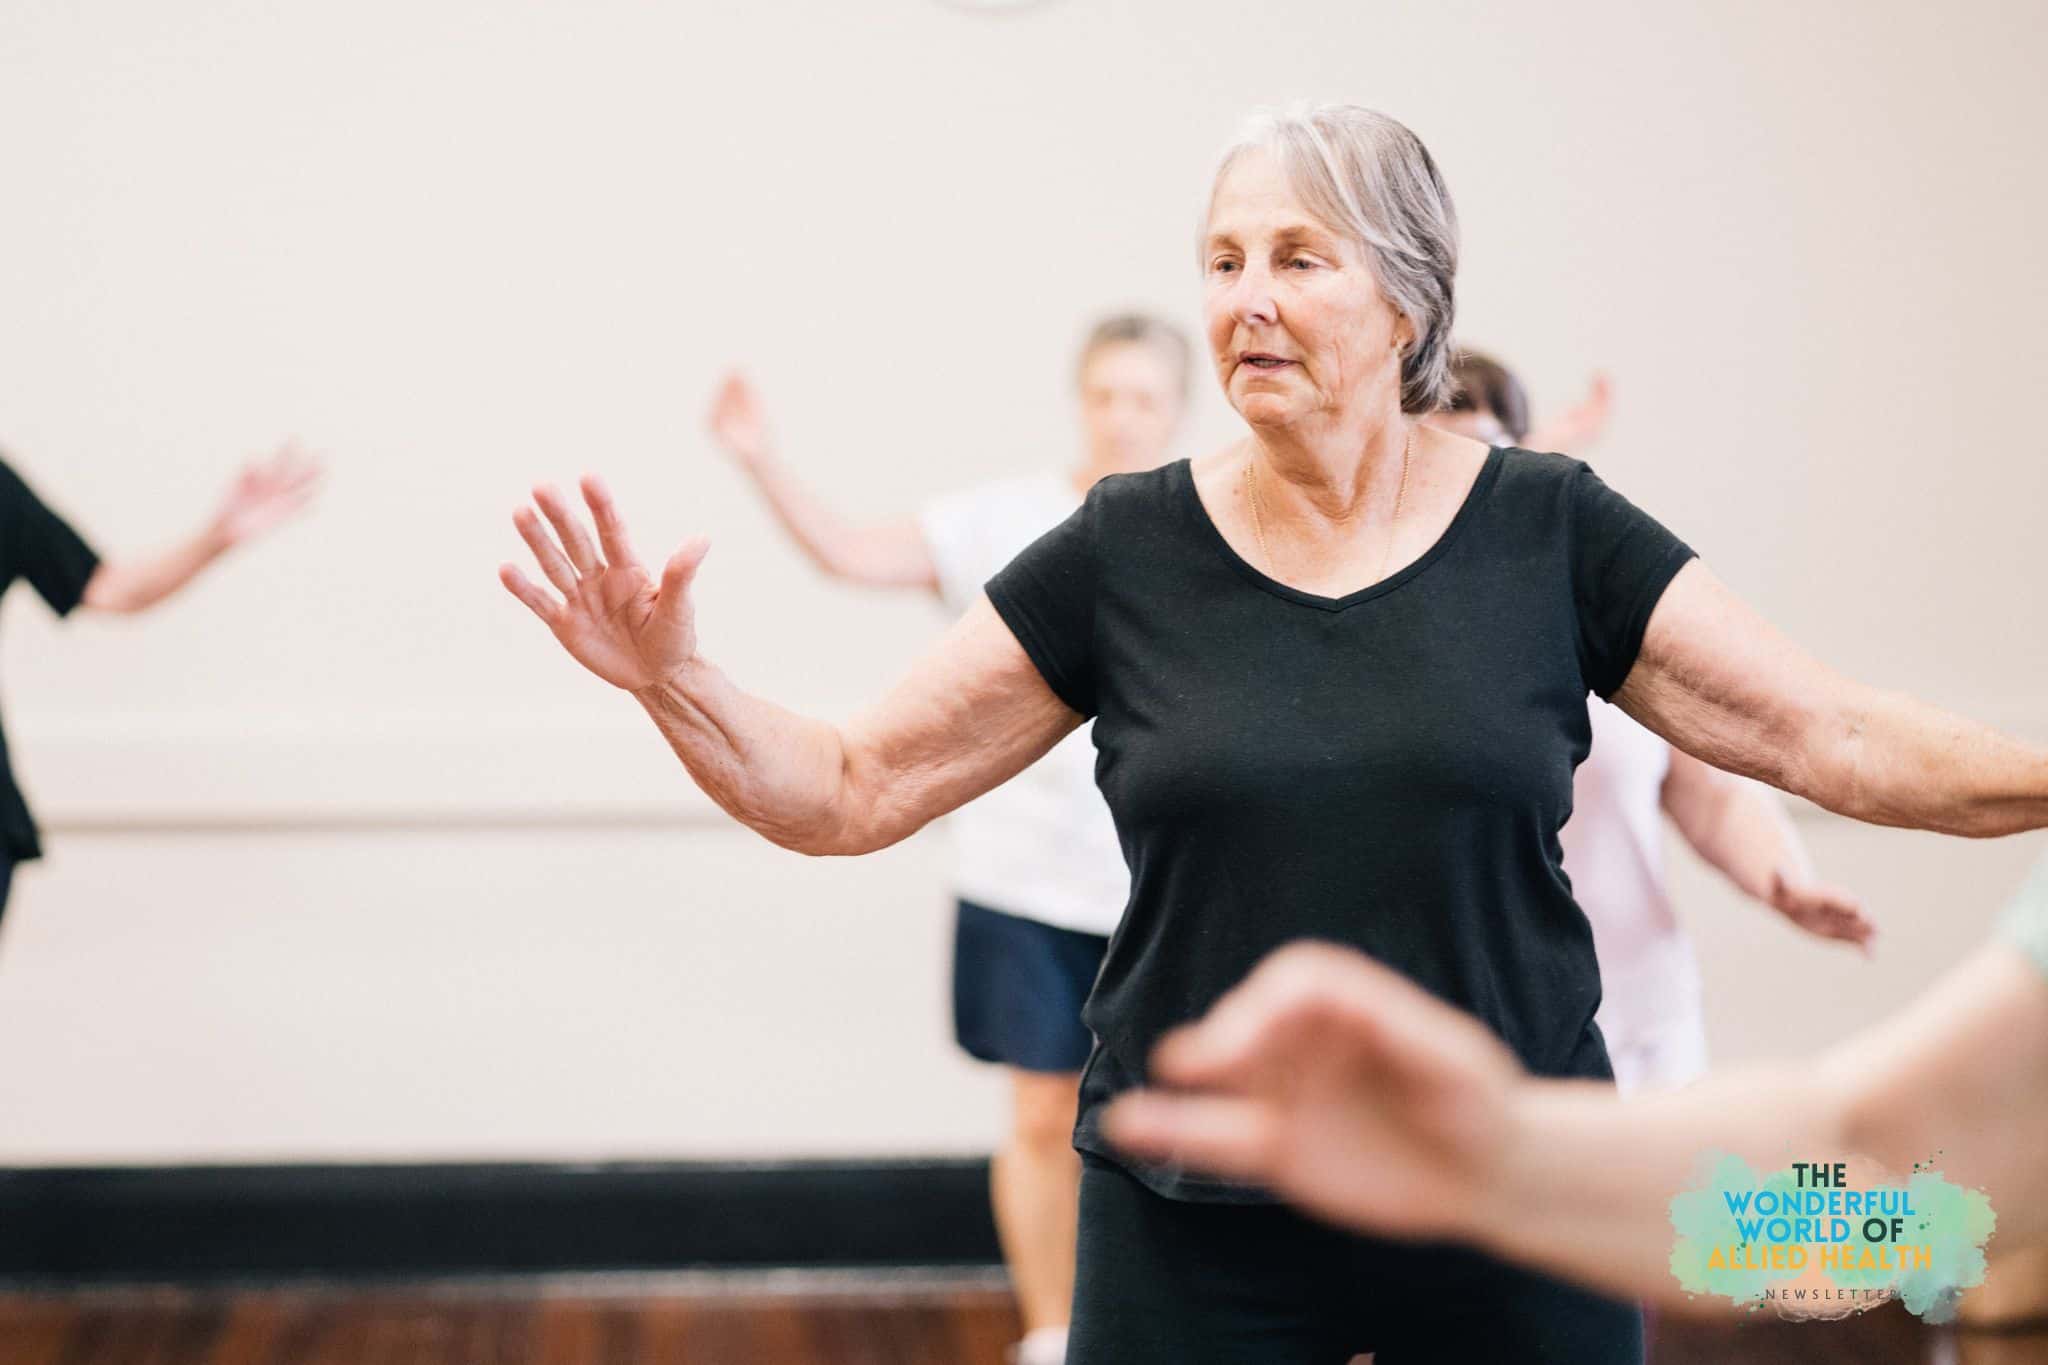 Sign up for The Wonderful World of Allied Health Newsletter on how Dance Therapy rehabilitates adults with Mild Cognitive Impairment